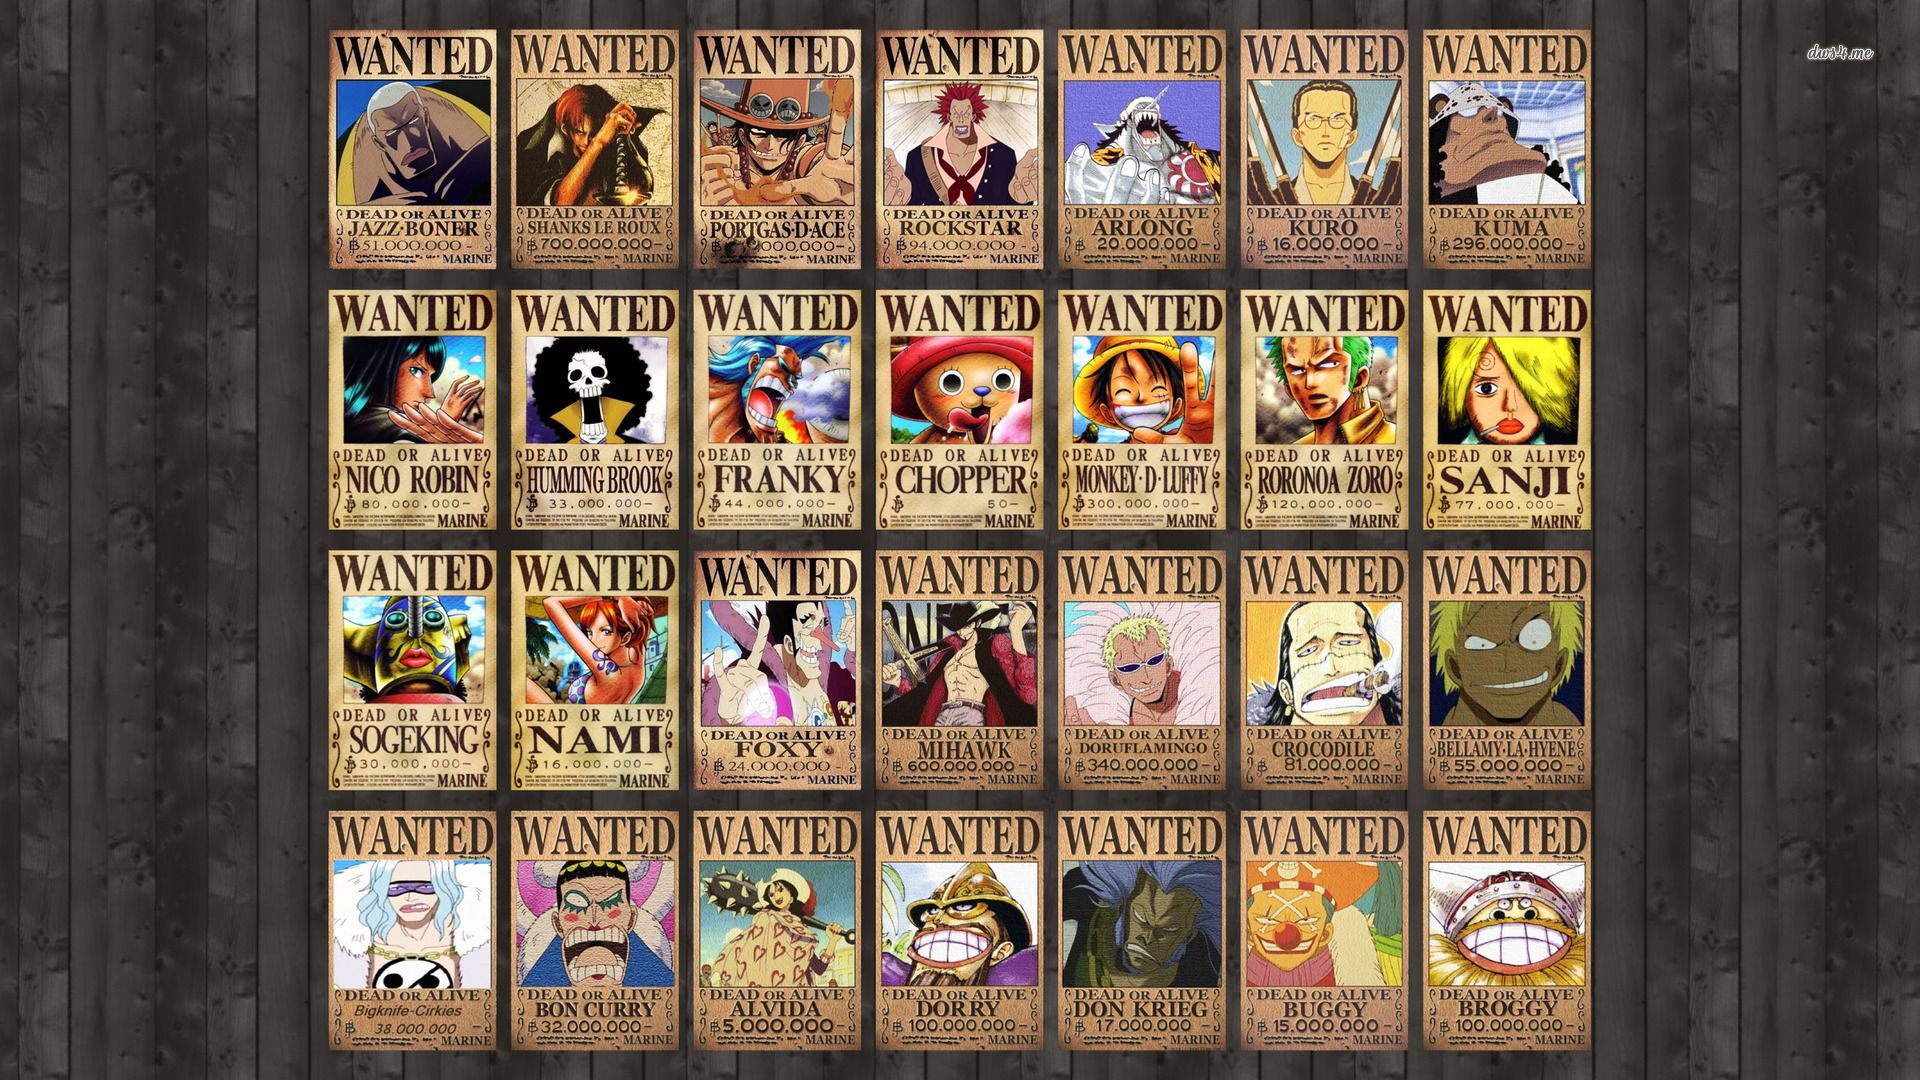 One Piece wanted posters wallpaper - Anime wallpapers - #8830